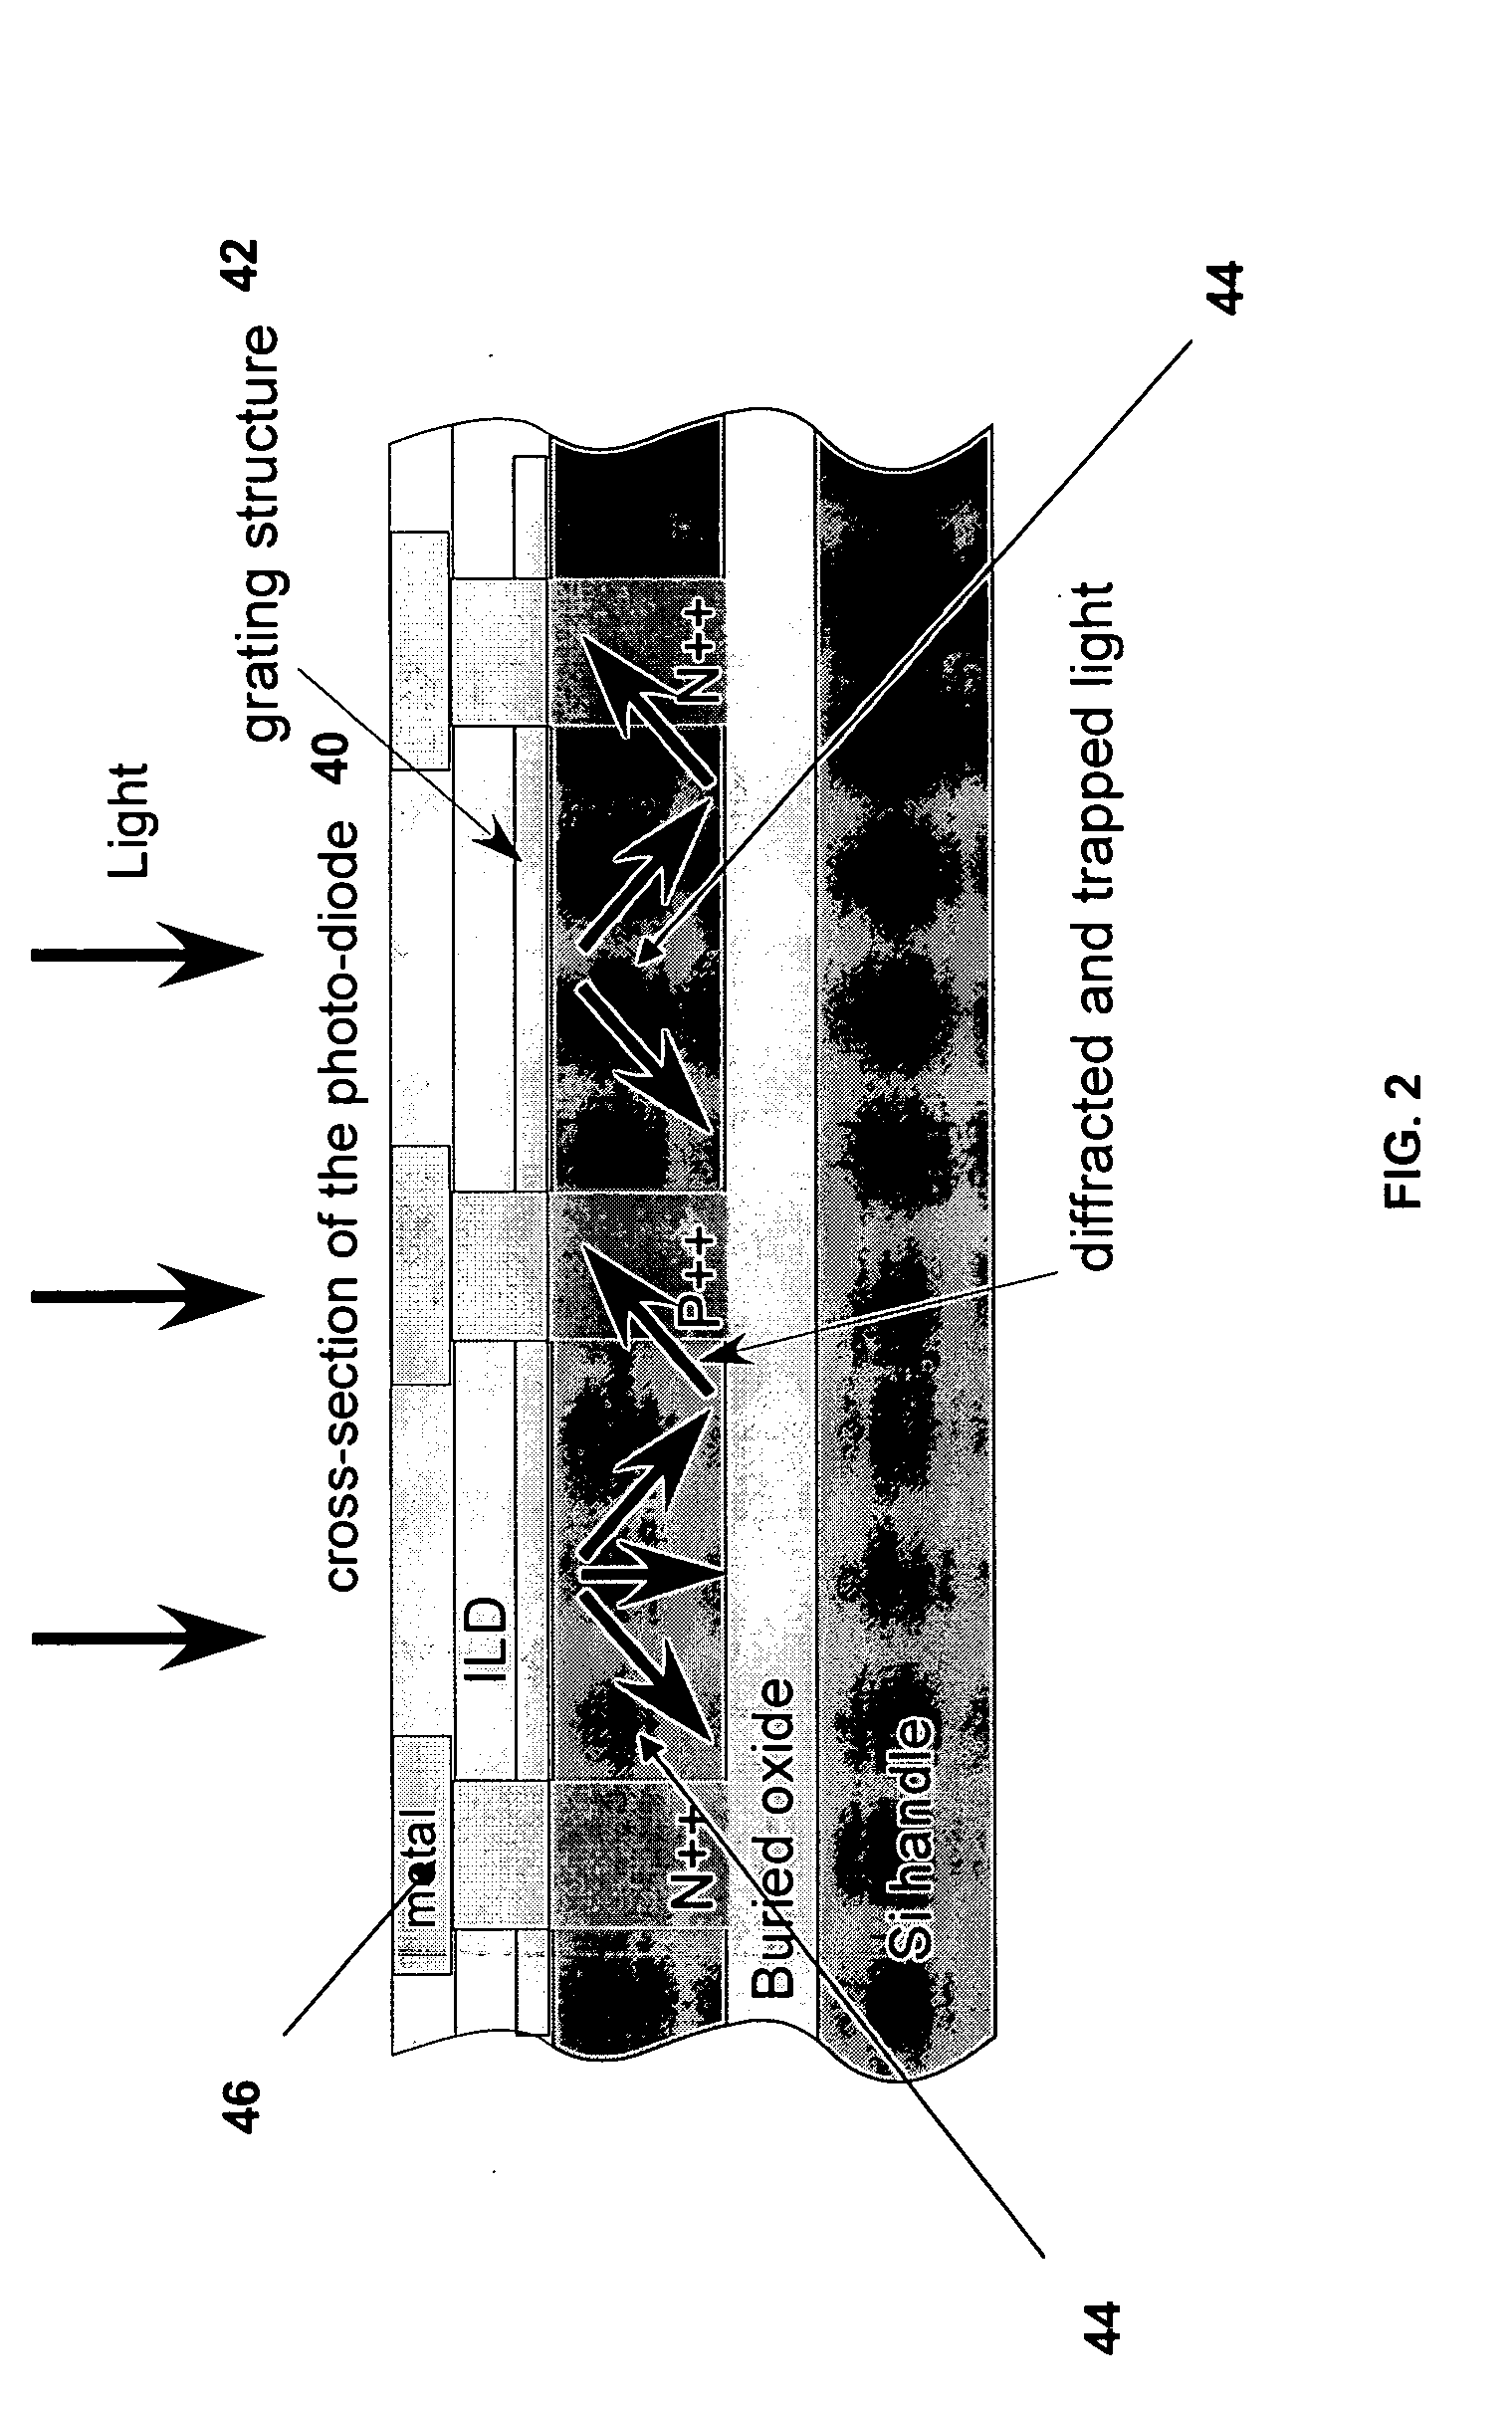 Inter-digitated silicon photodiode based optical receiver on SOI